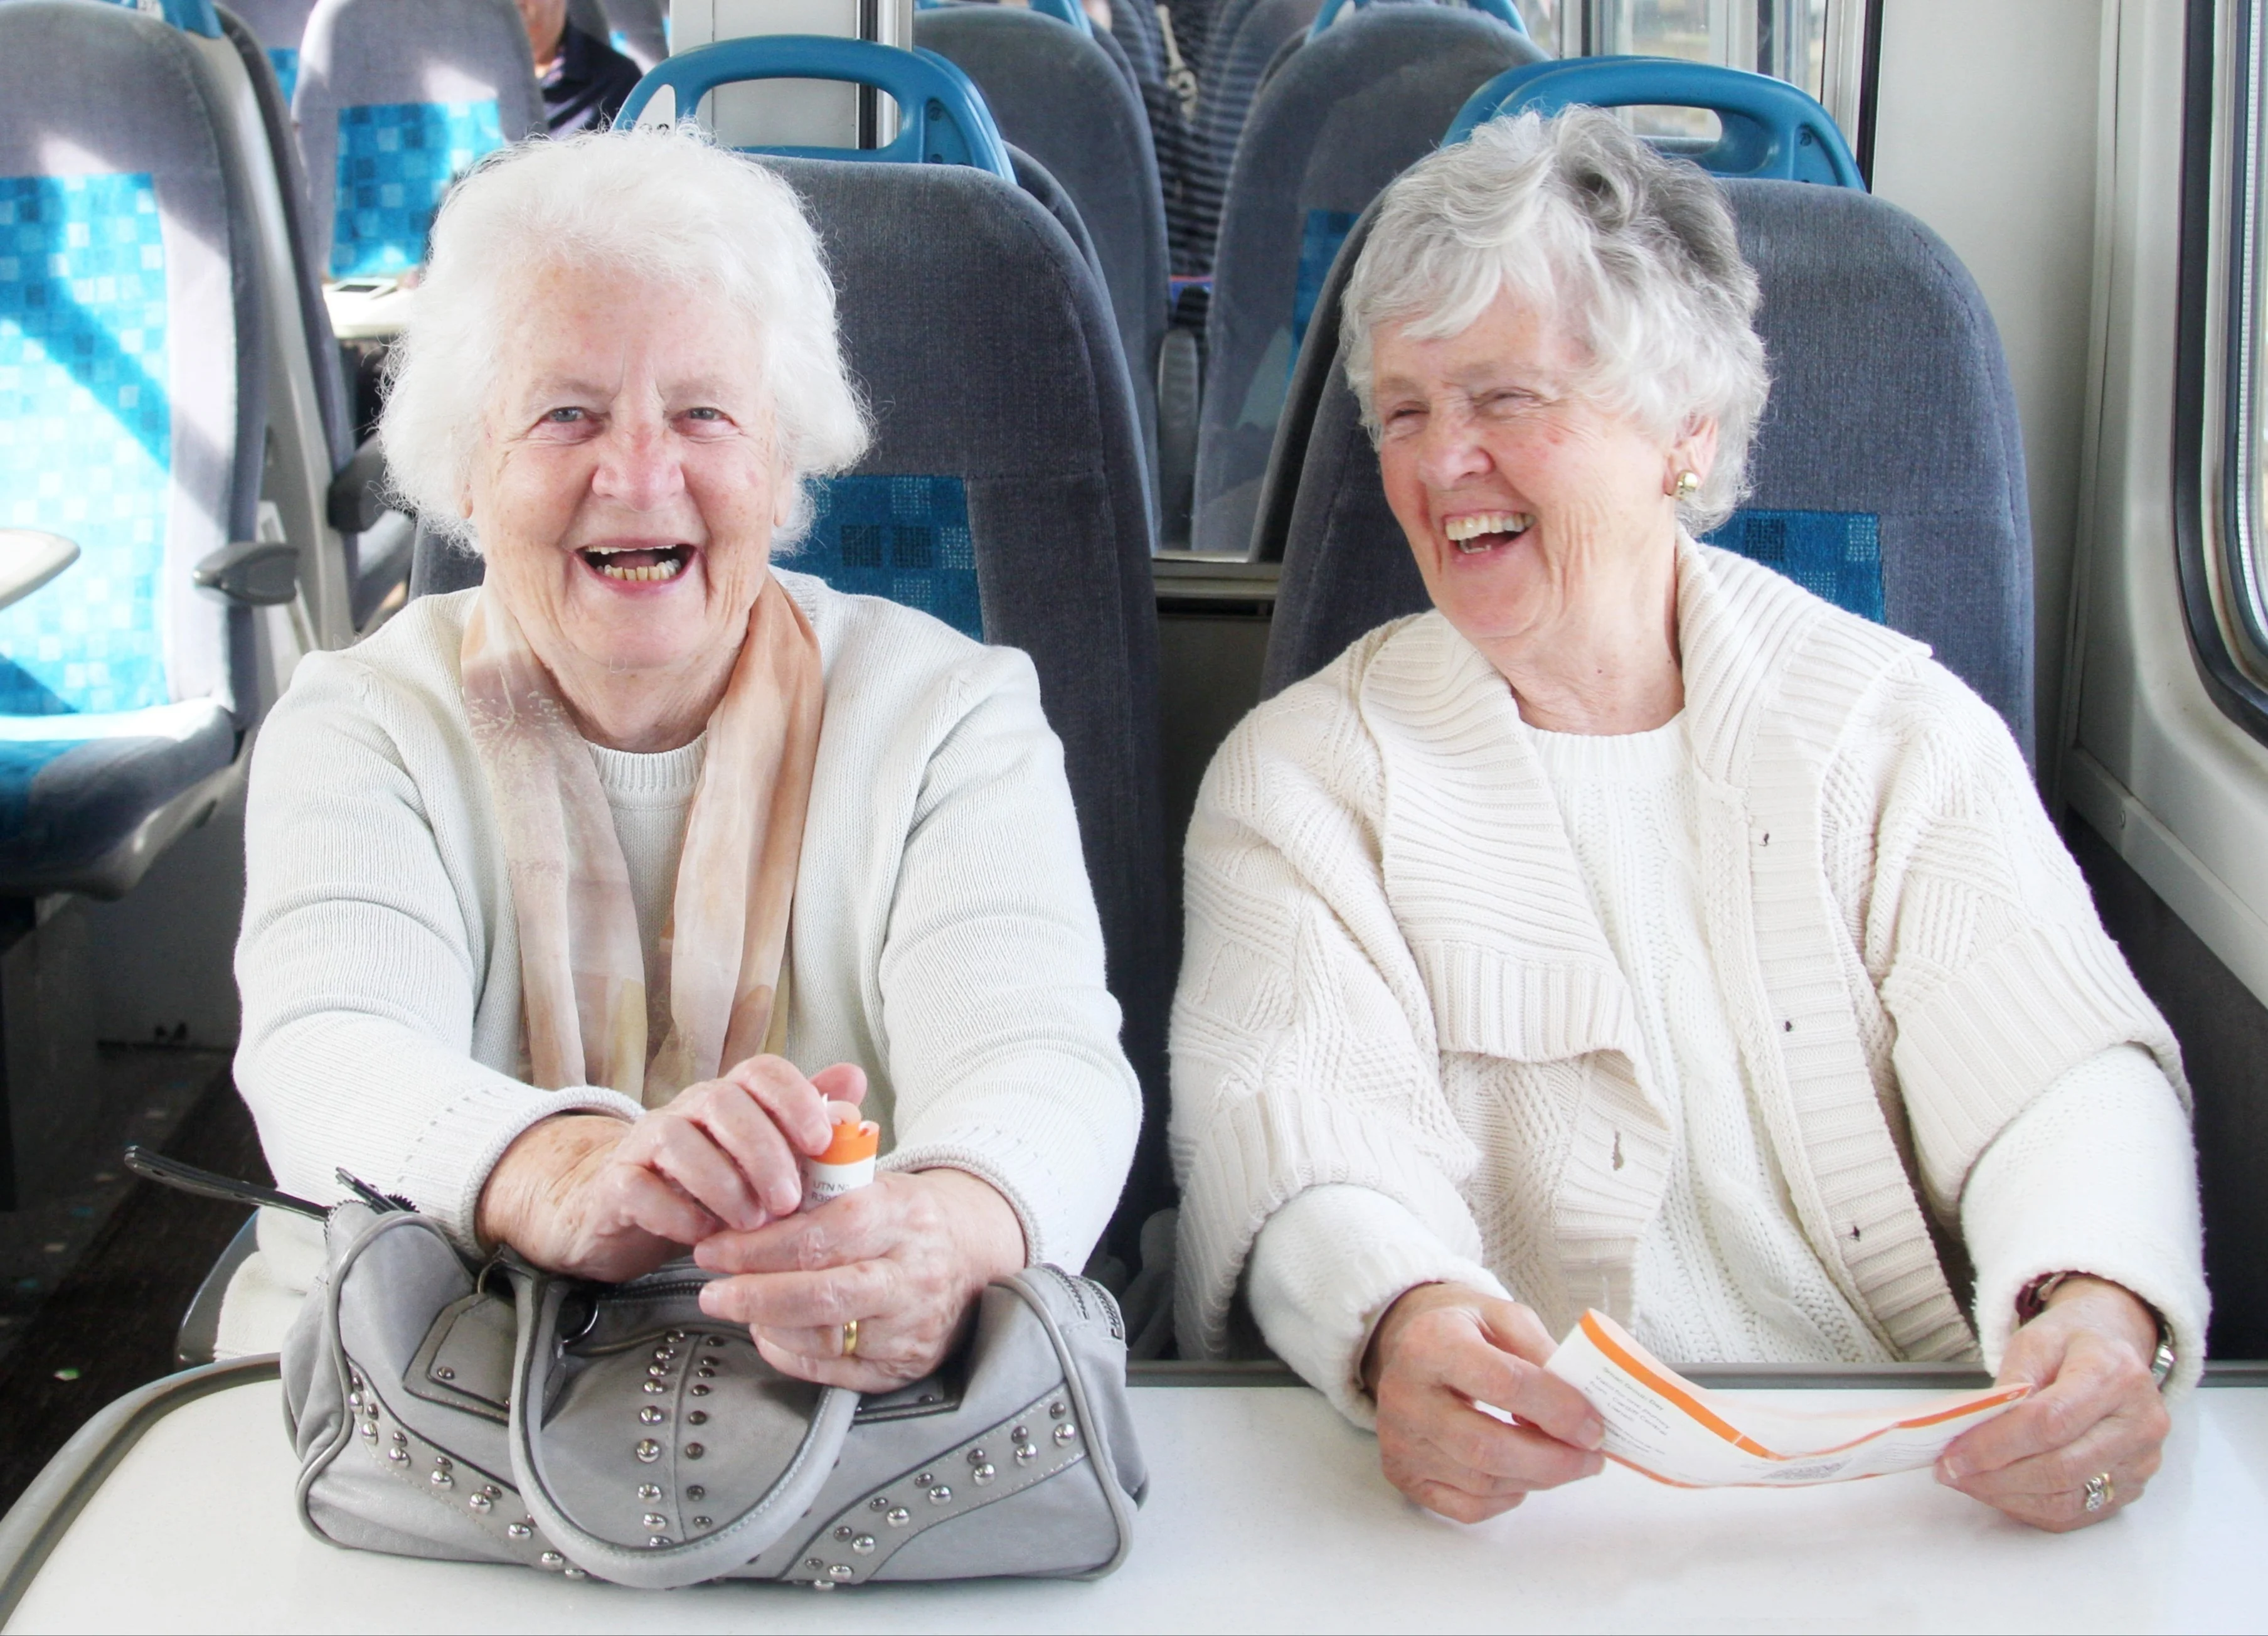 2 elderly white women with white hair are sitting next to each other at a train table, holding train tickets in their hands and laughing. 